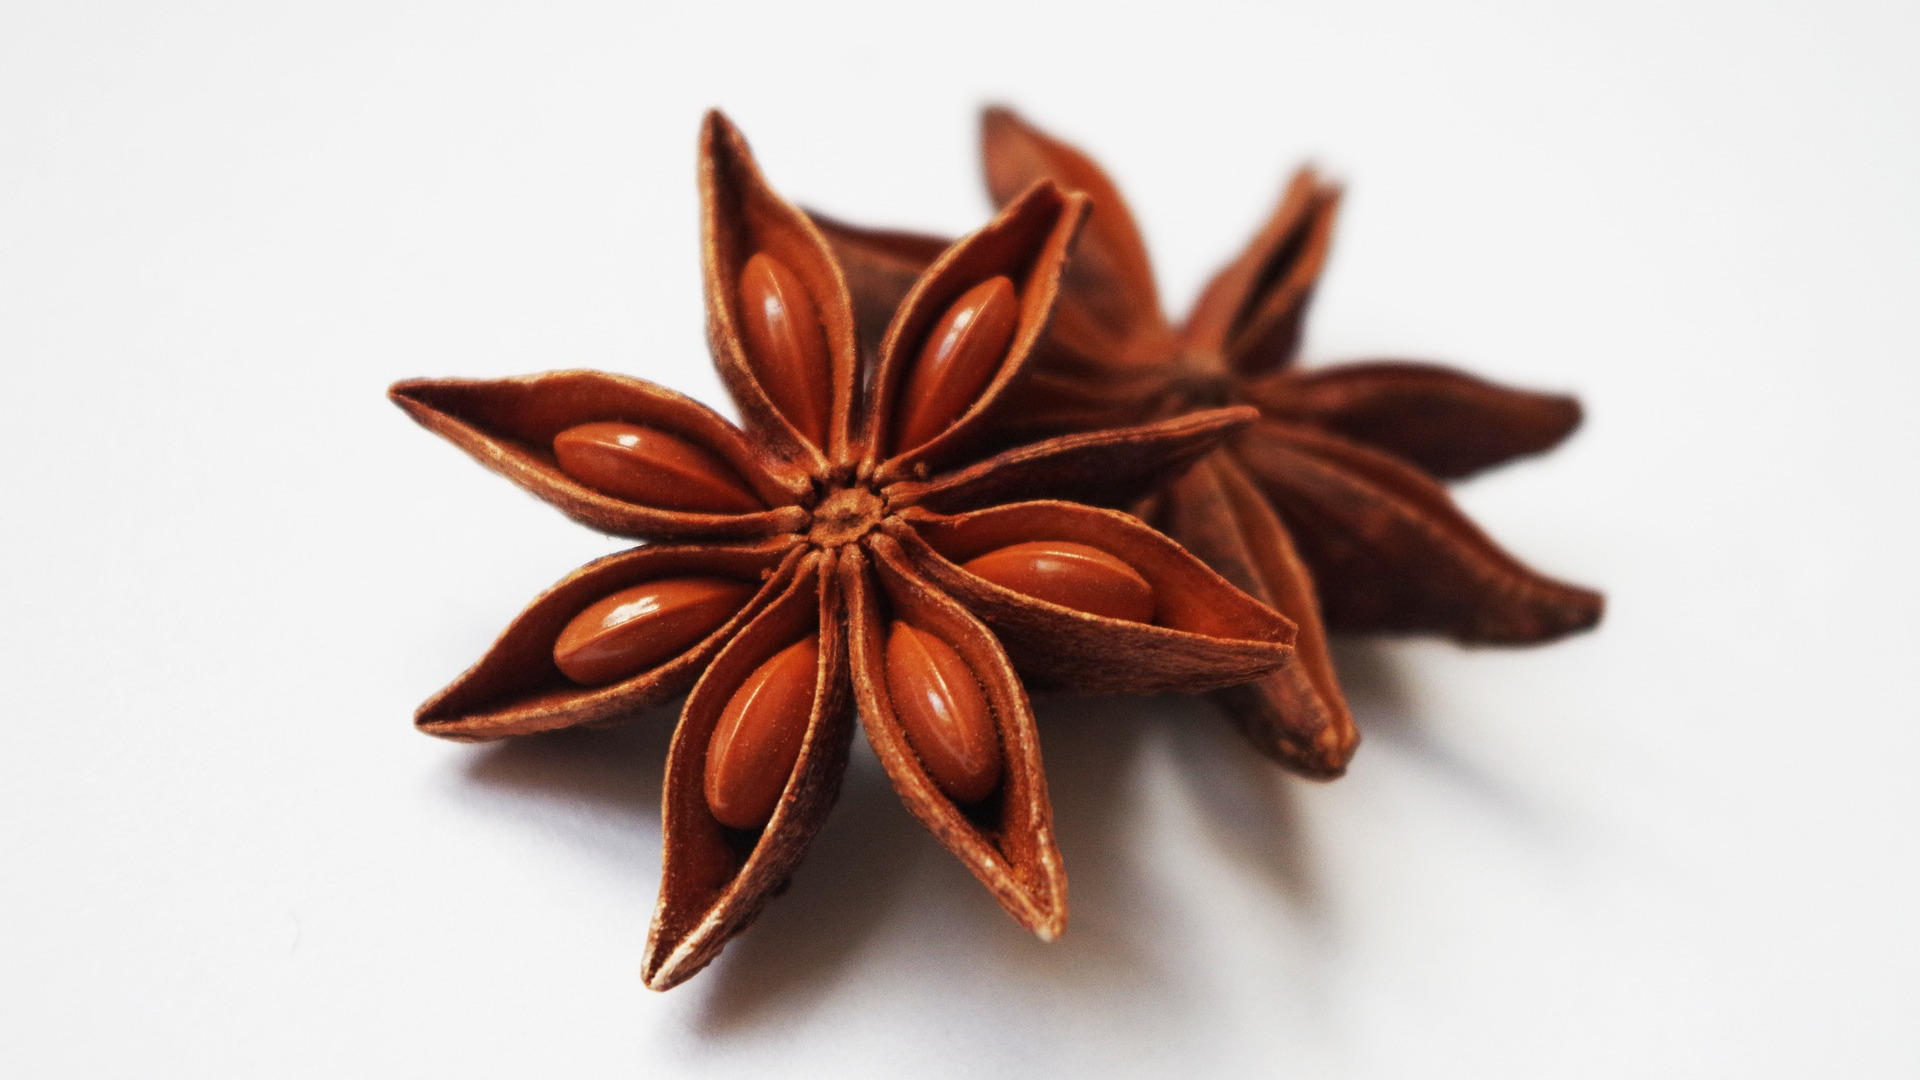 Star Anise Seed Pod used to make Star Anise Essential Oil